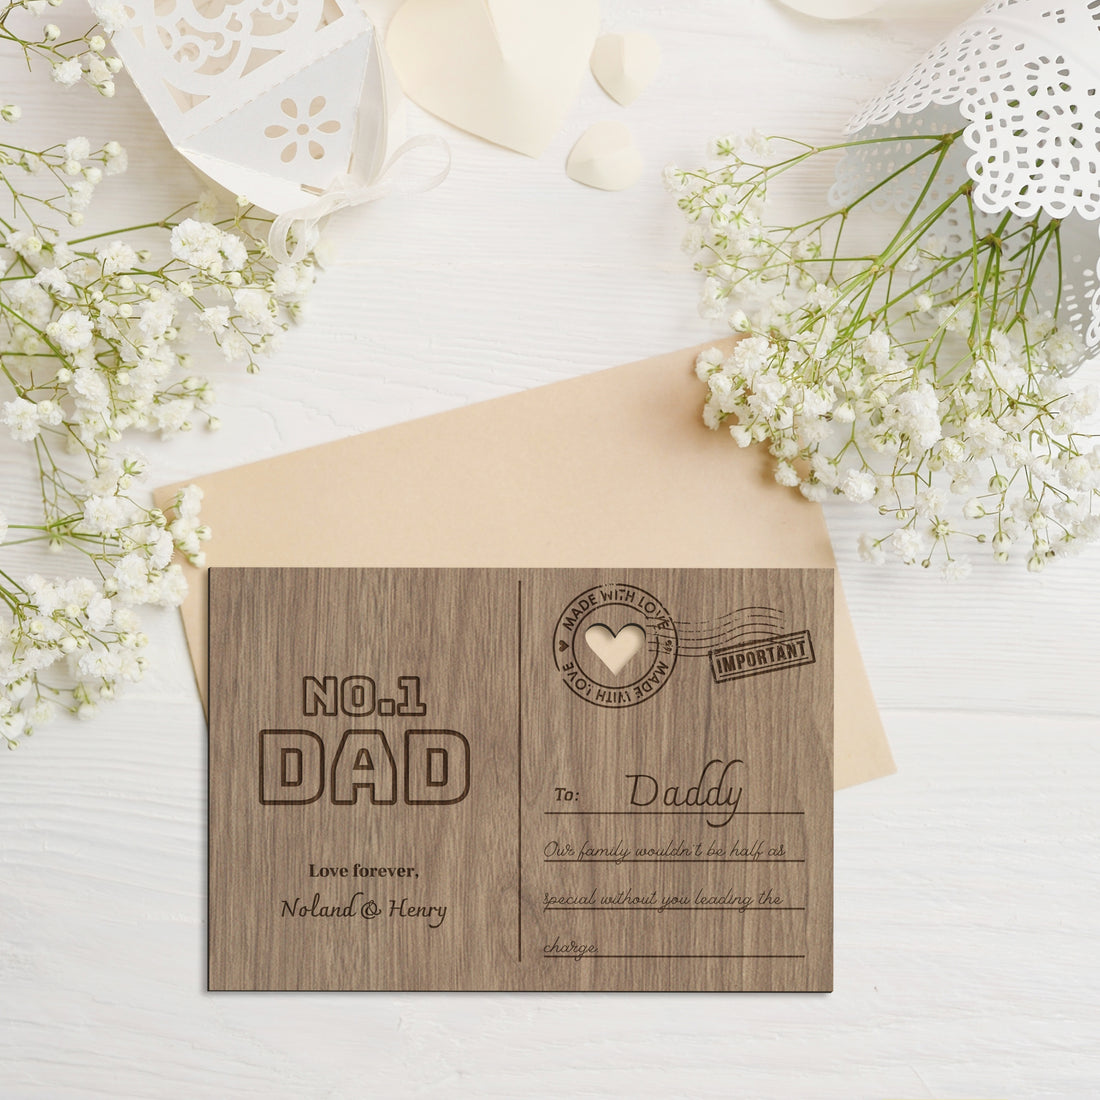 Personalised Wooden Father's Day Postcard, Engraved Timber Celebrate Message & Name Display Stand, Keepsake Gift Card for Dad, Grandpa, Him